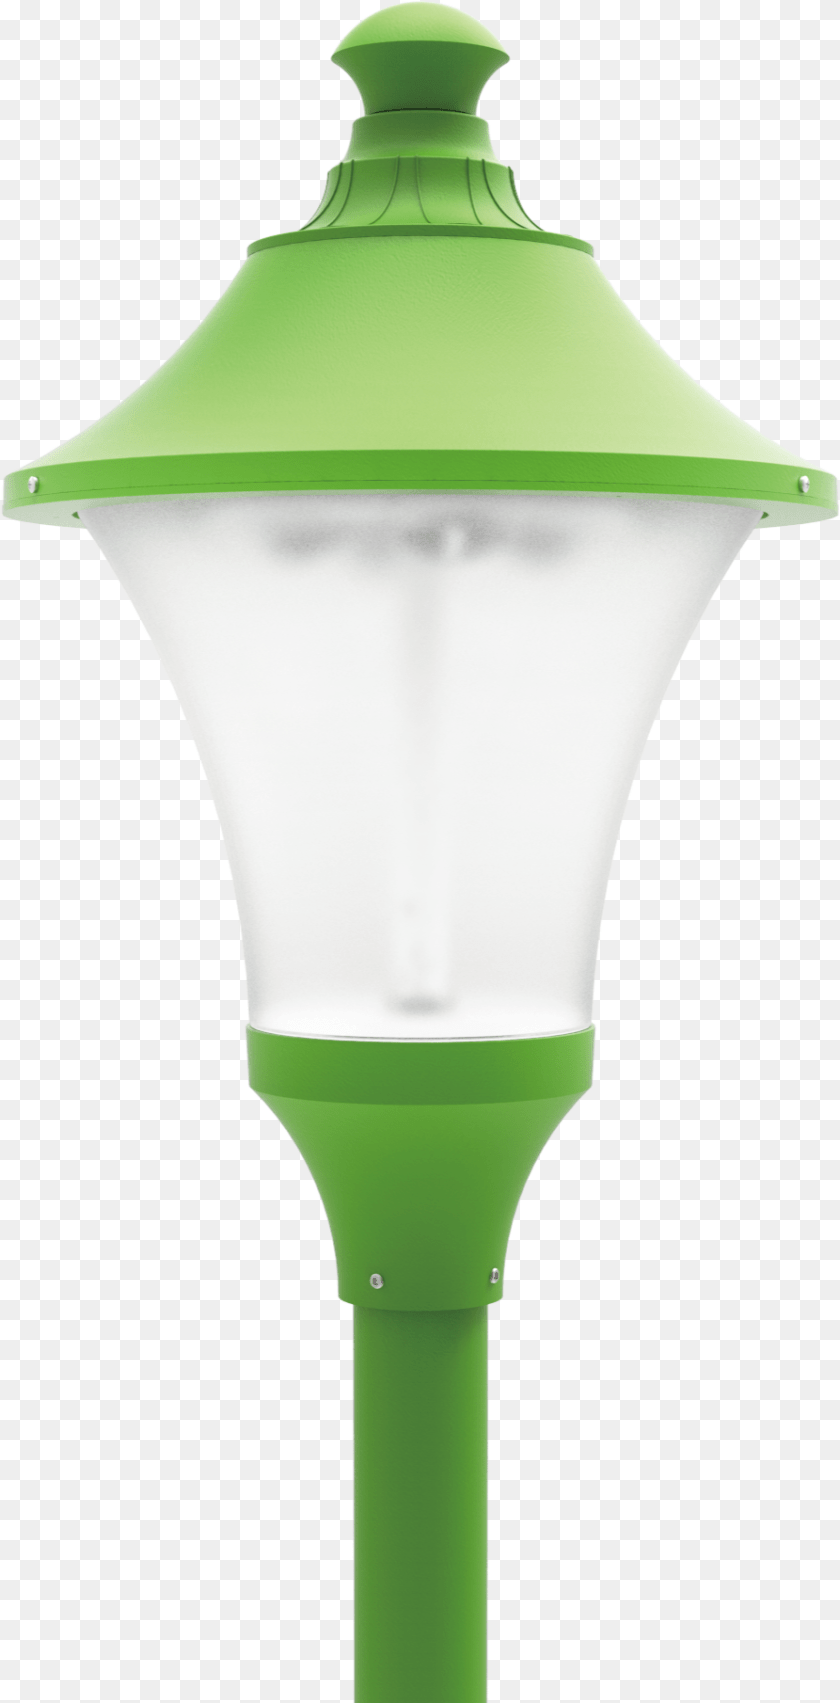 893x1810 Led Post Top Light Fixtures Street Light, Lamp, Lampshade, Lamp Post Clipart PNG